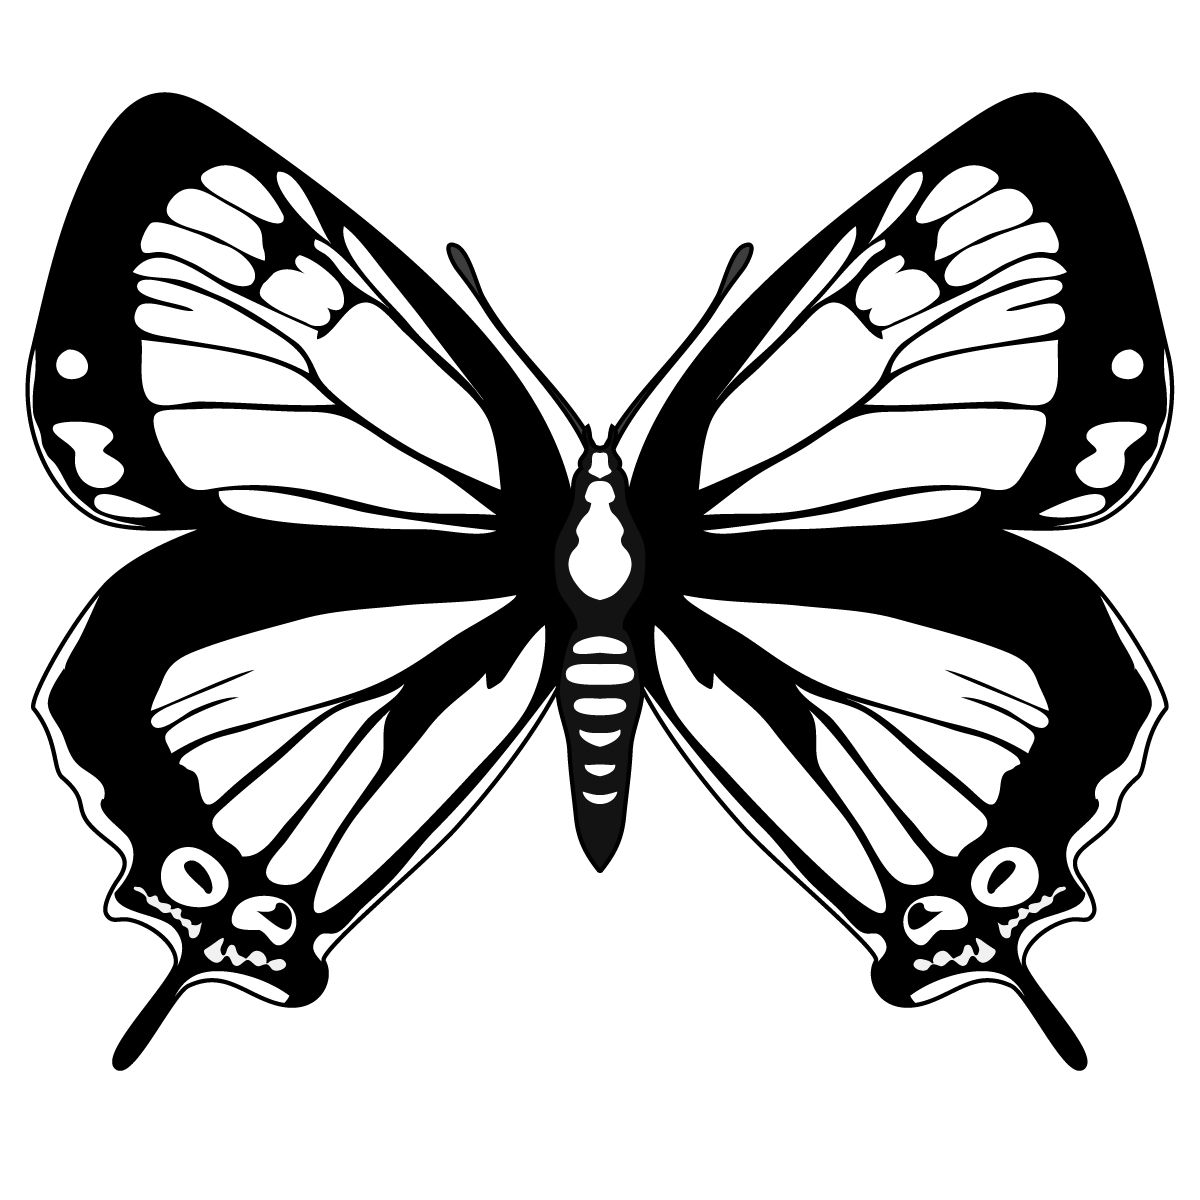 Black White Butterfly Images - ClipArt Best